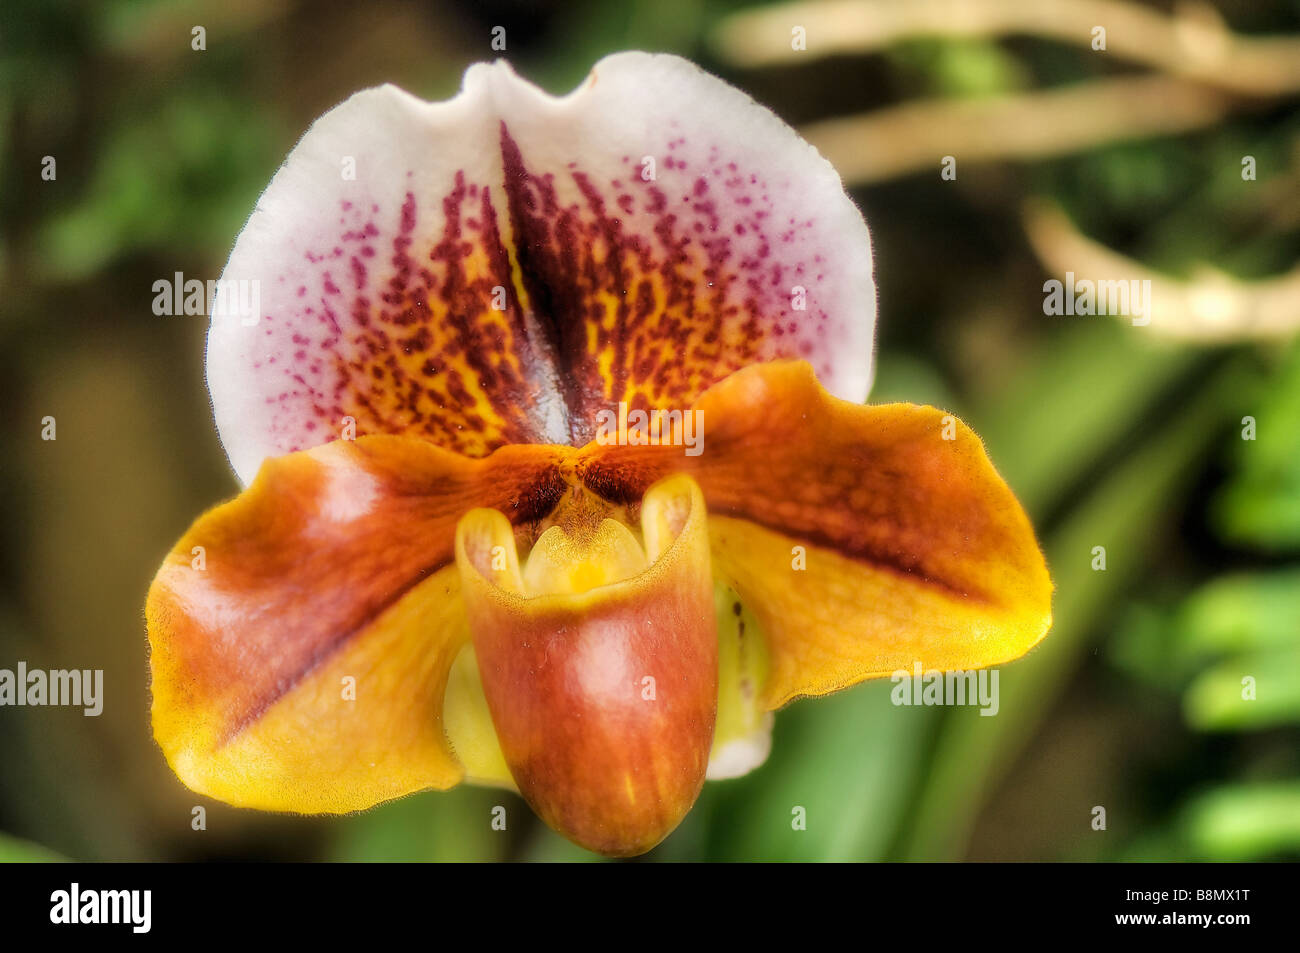 A Close-up of Paphiopedilum Orchid Flower Stock Photo